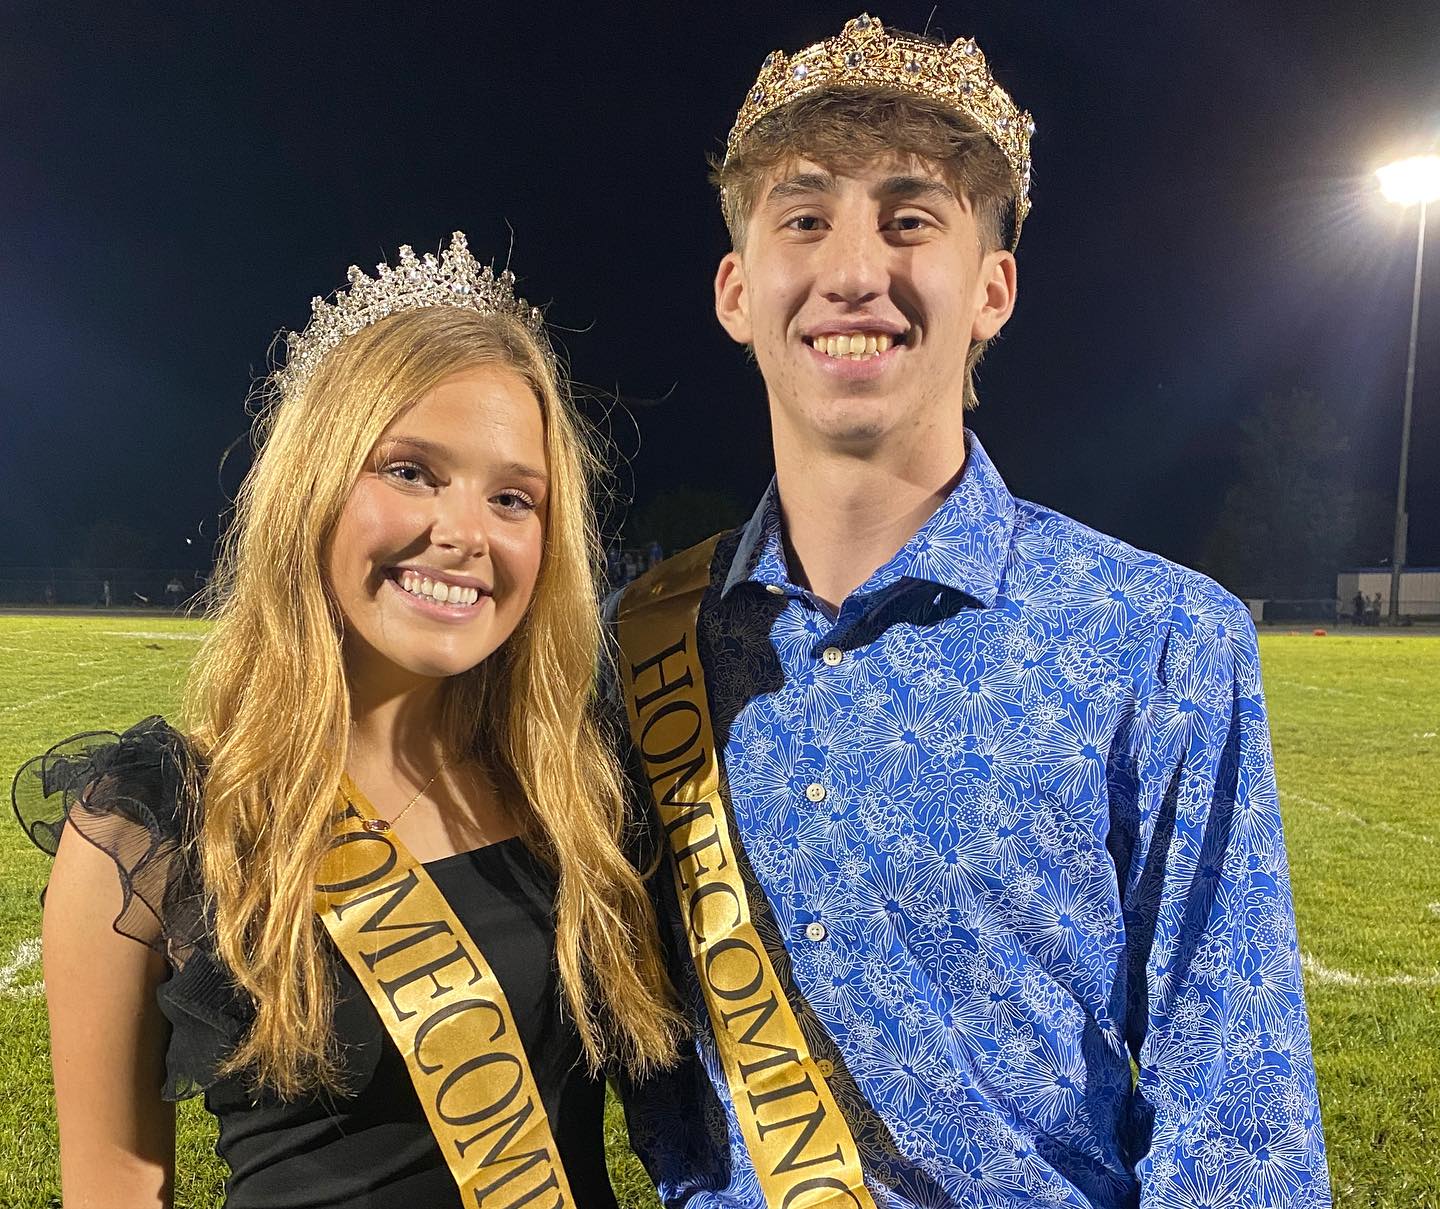 SCA Seniors Fischer Ethridge and Audrey Ellett were crowned and named the SCA 2023 Homecoming King and Queen during half-time of the SCA Homecoming football game against Harrisonville.